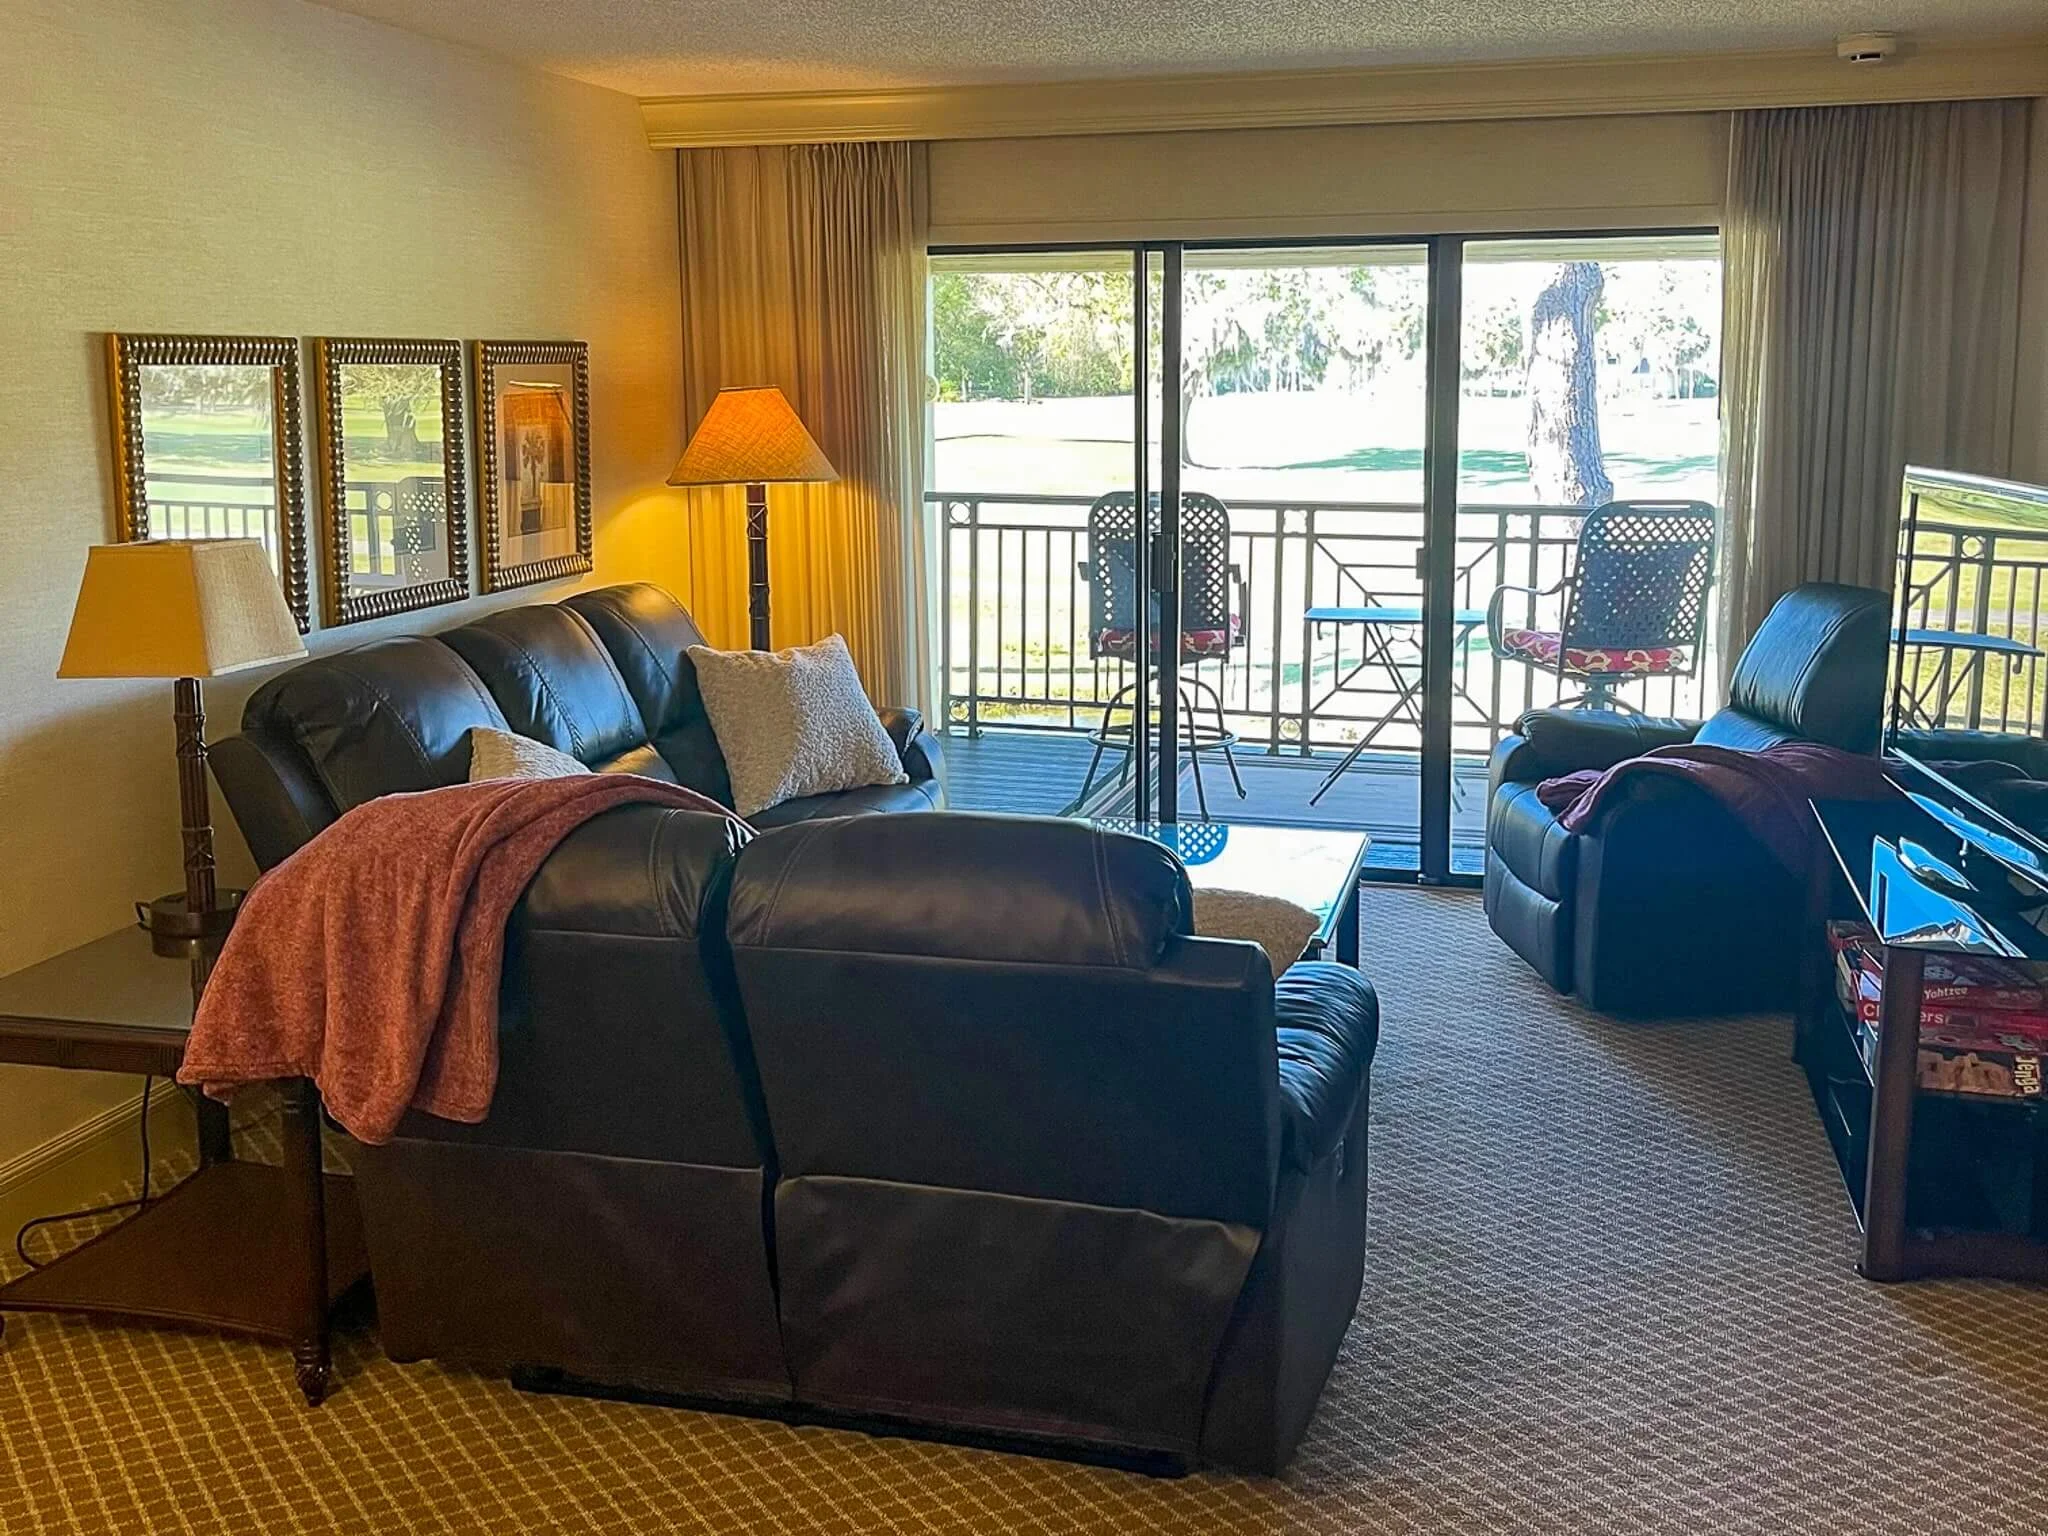 The living area and porch of luxury Vacation Rentals in the Tampa Bay Area